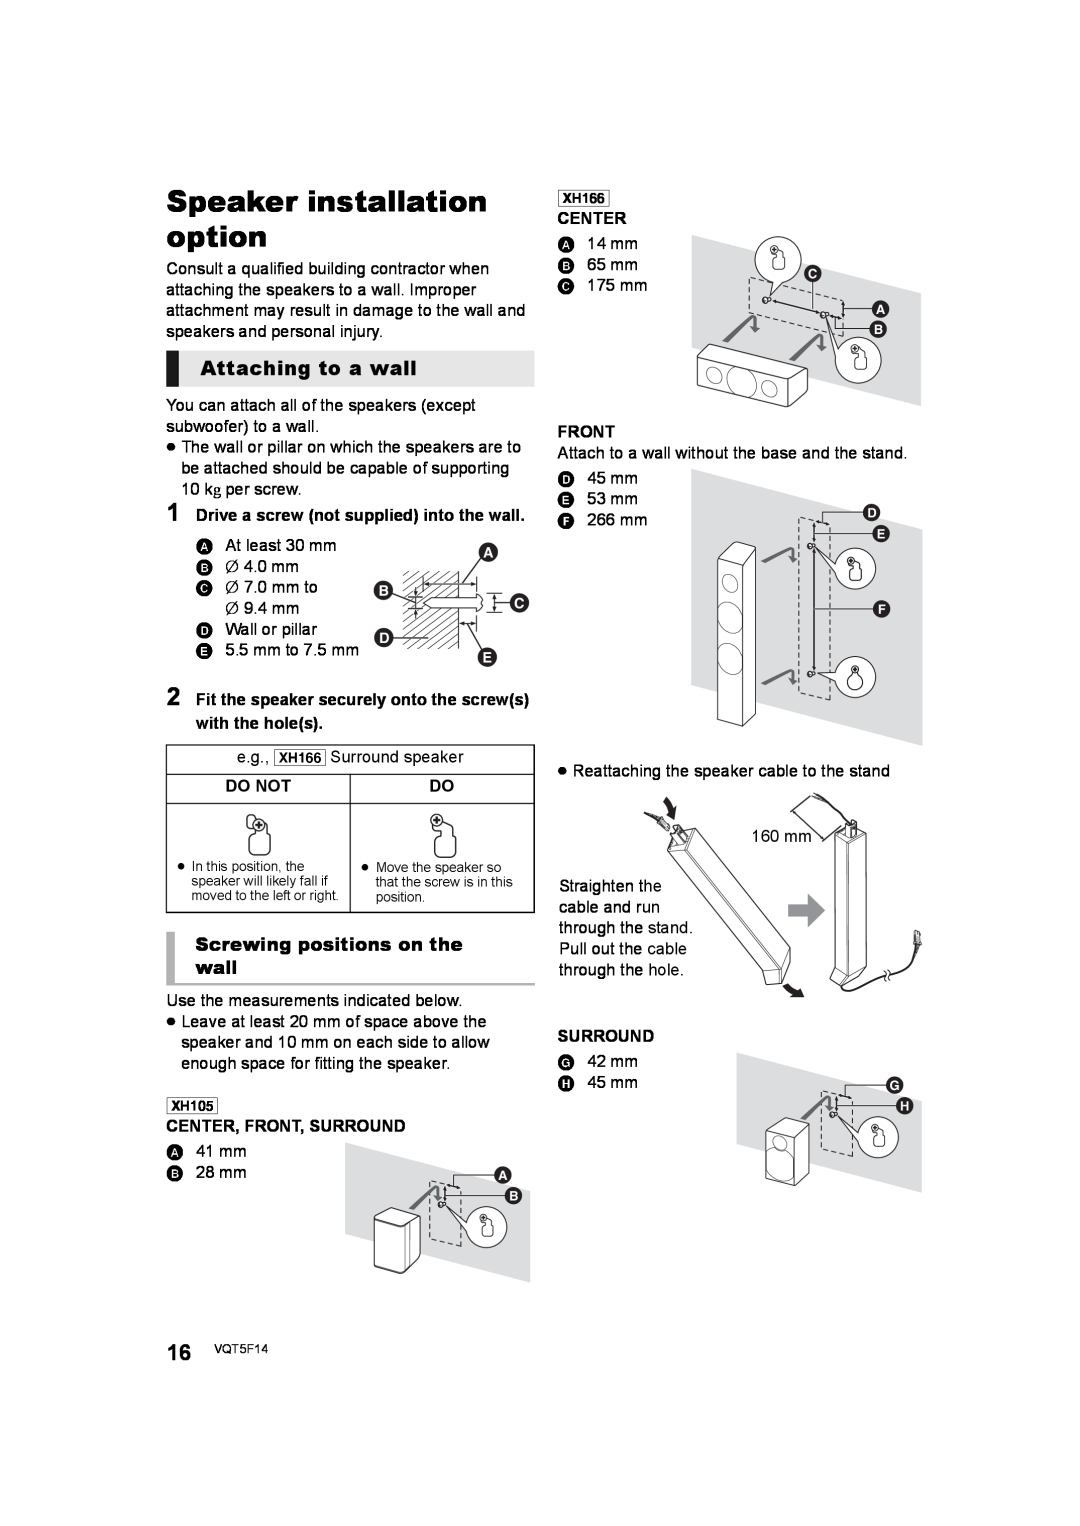 Panasonic SC-XH166 owner manual Speaker installation option, Attaching to a wall, Screwing positions on the wall 